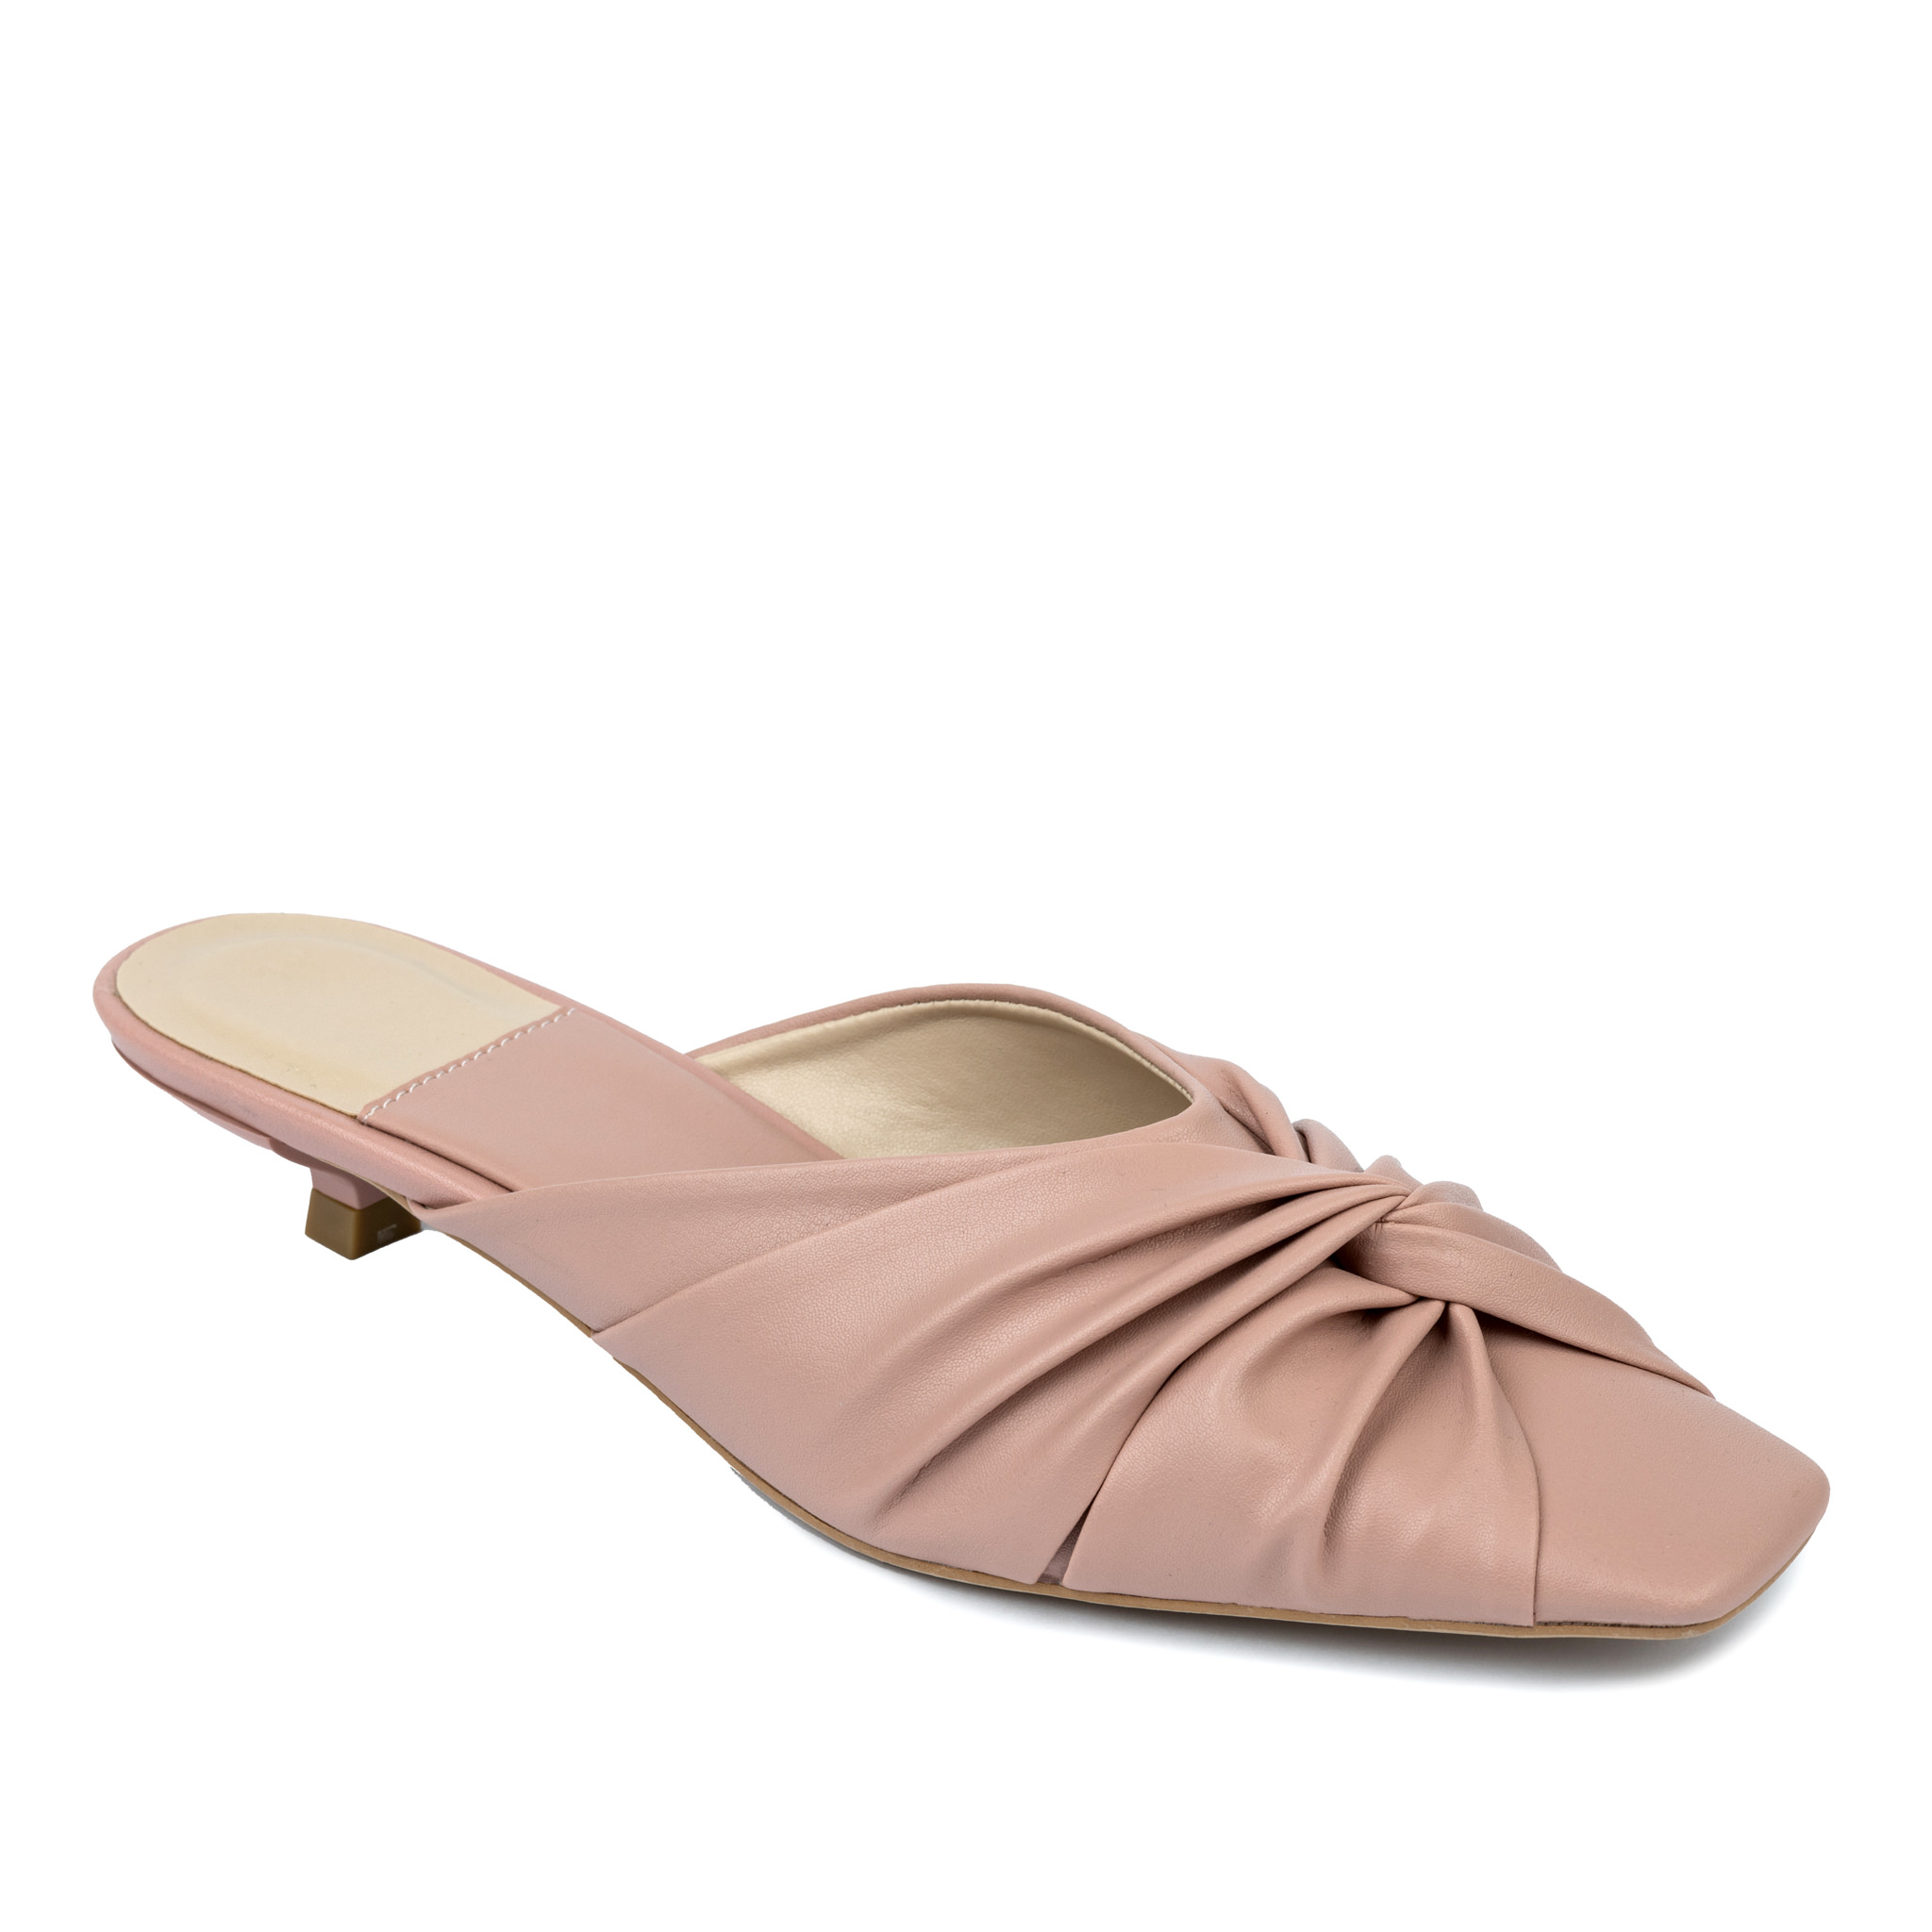 Women Slippers and Mules A437 - ROSE